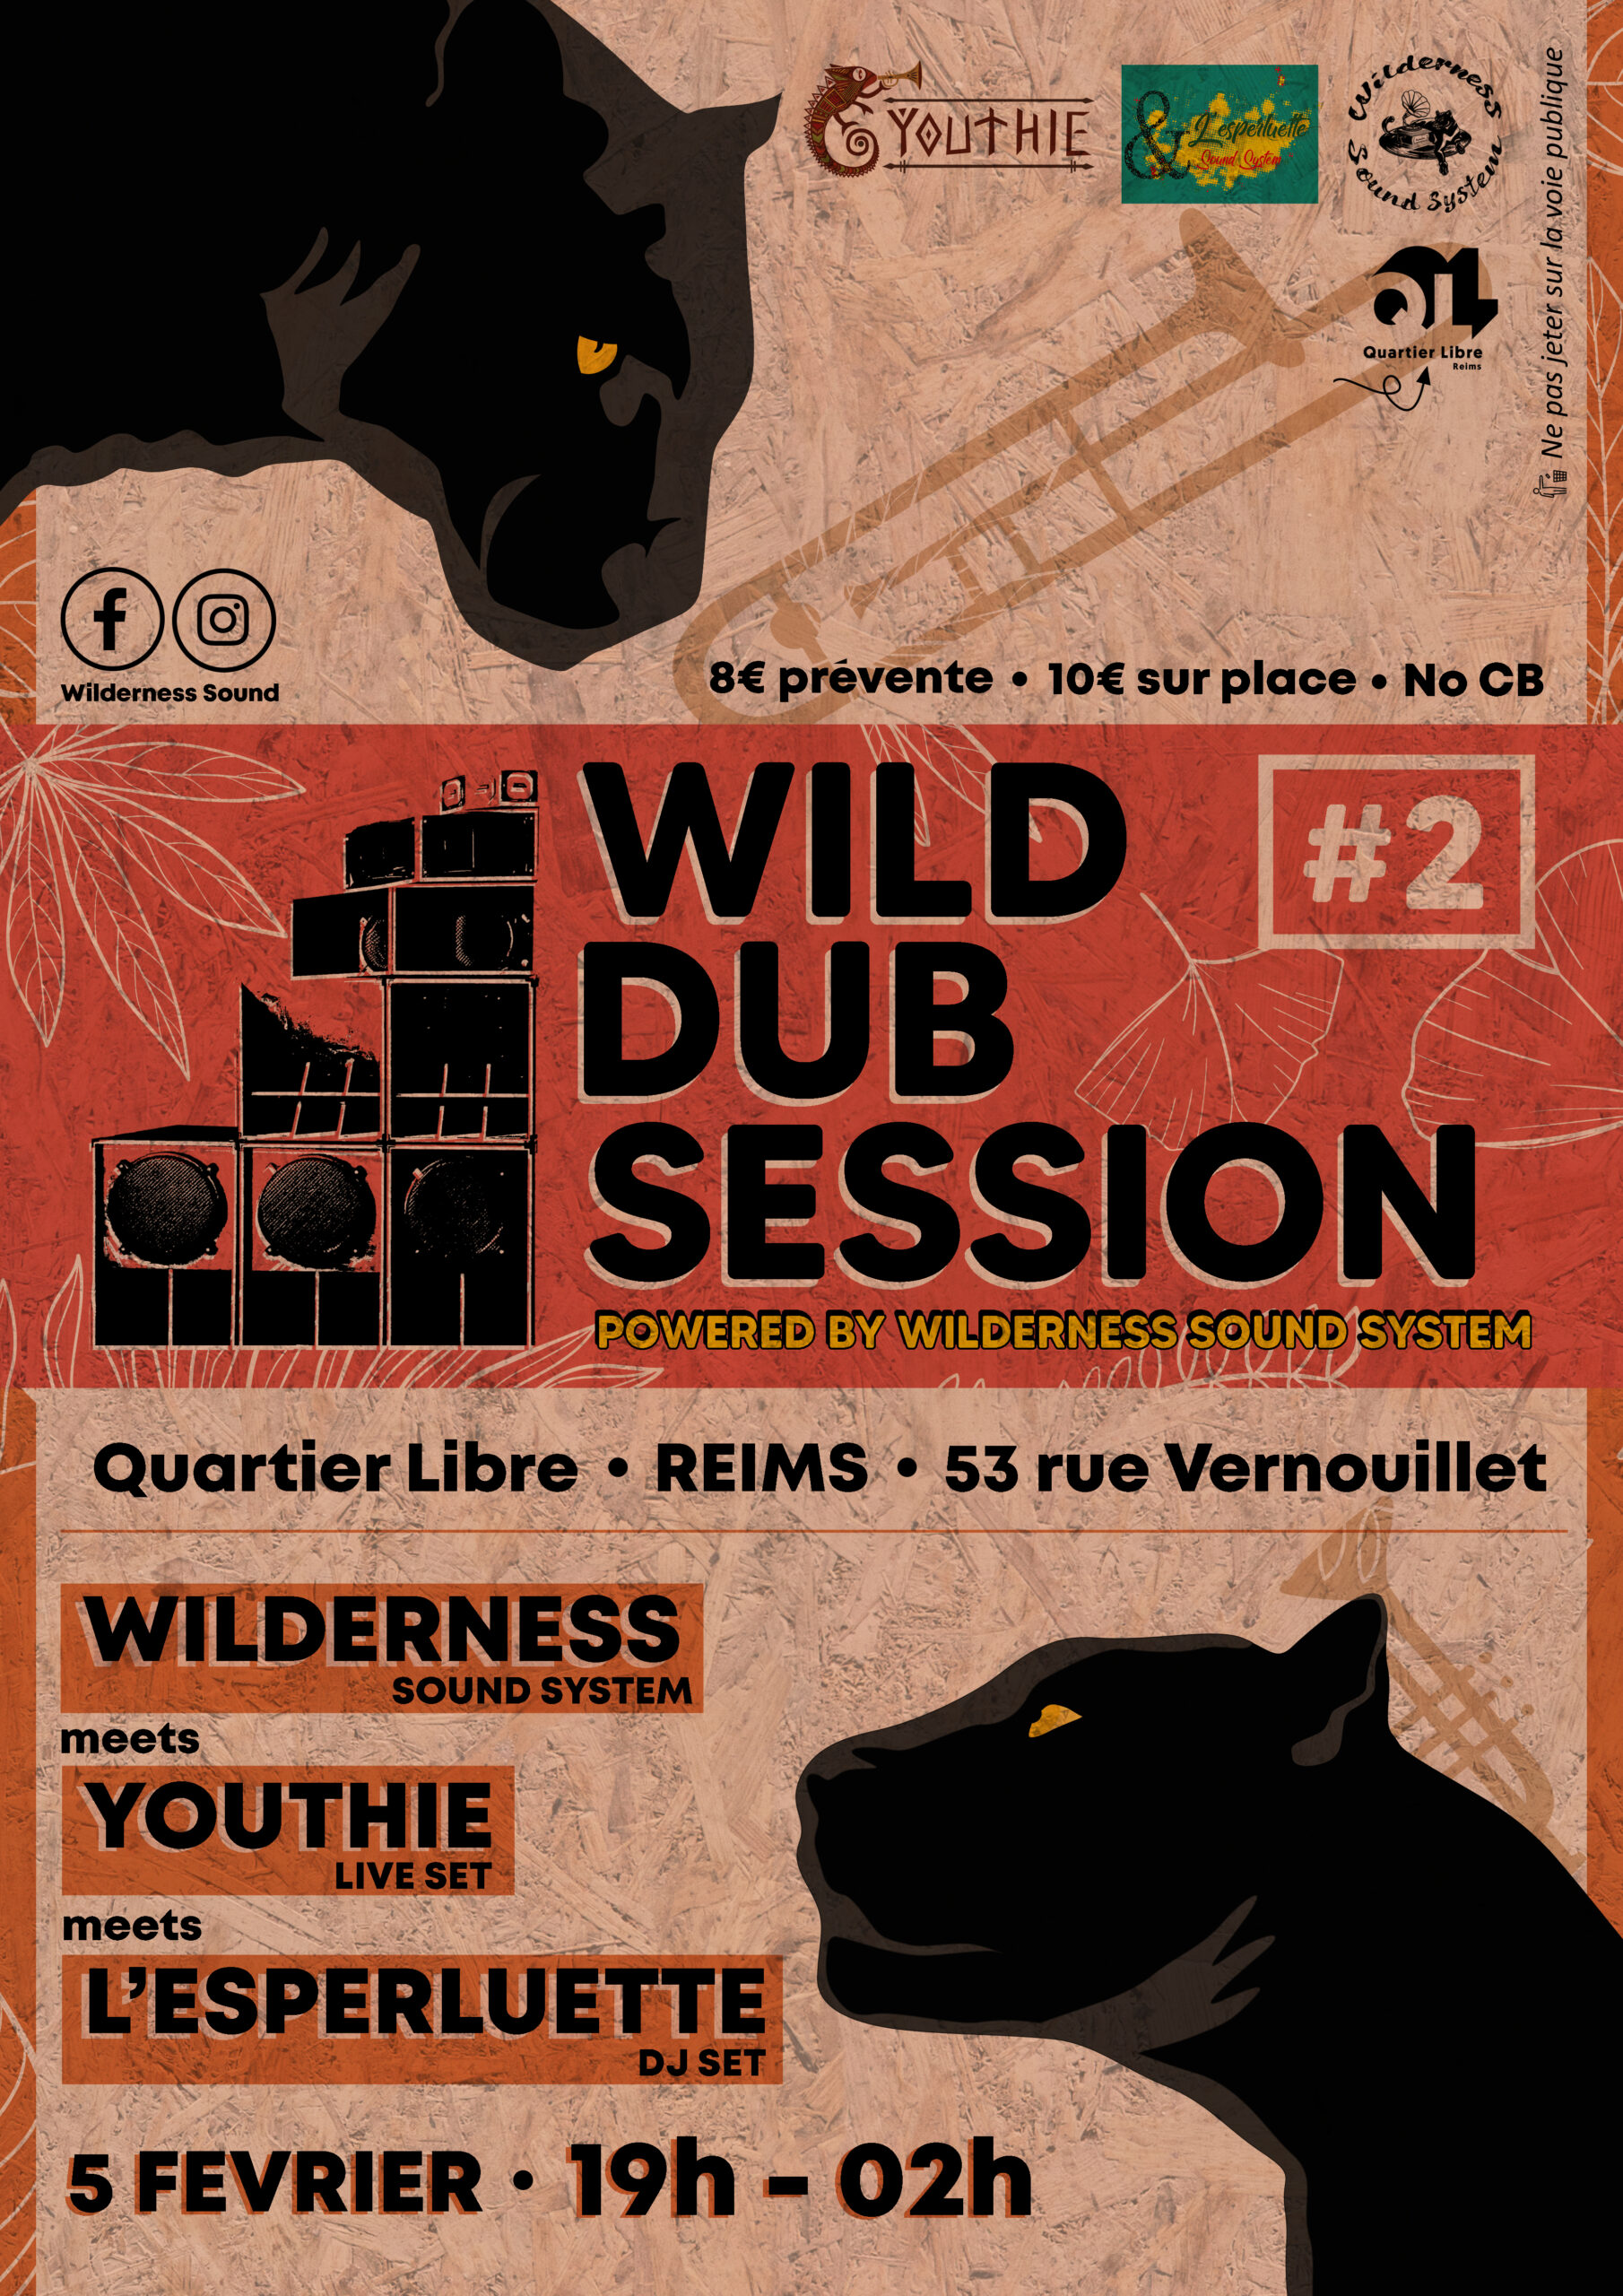 ANGERS DUB SESSION #1